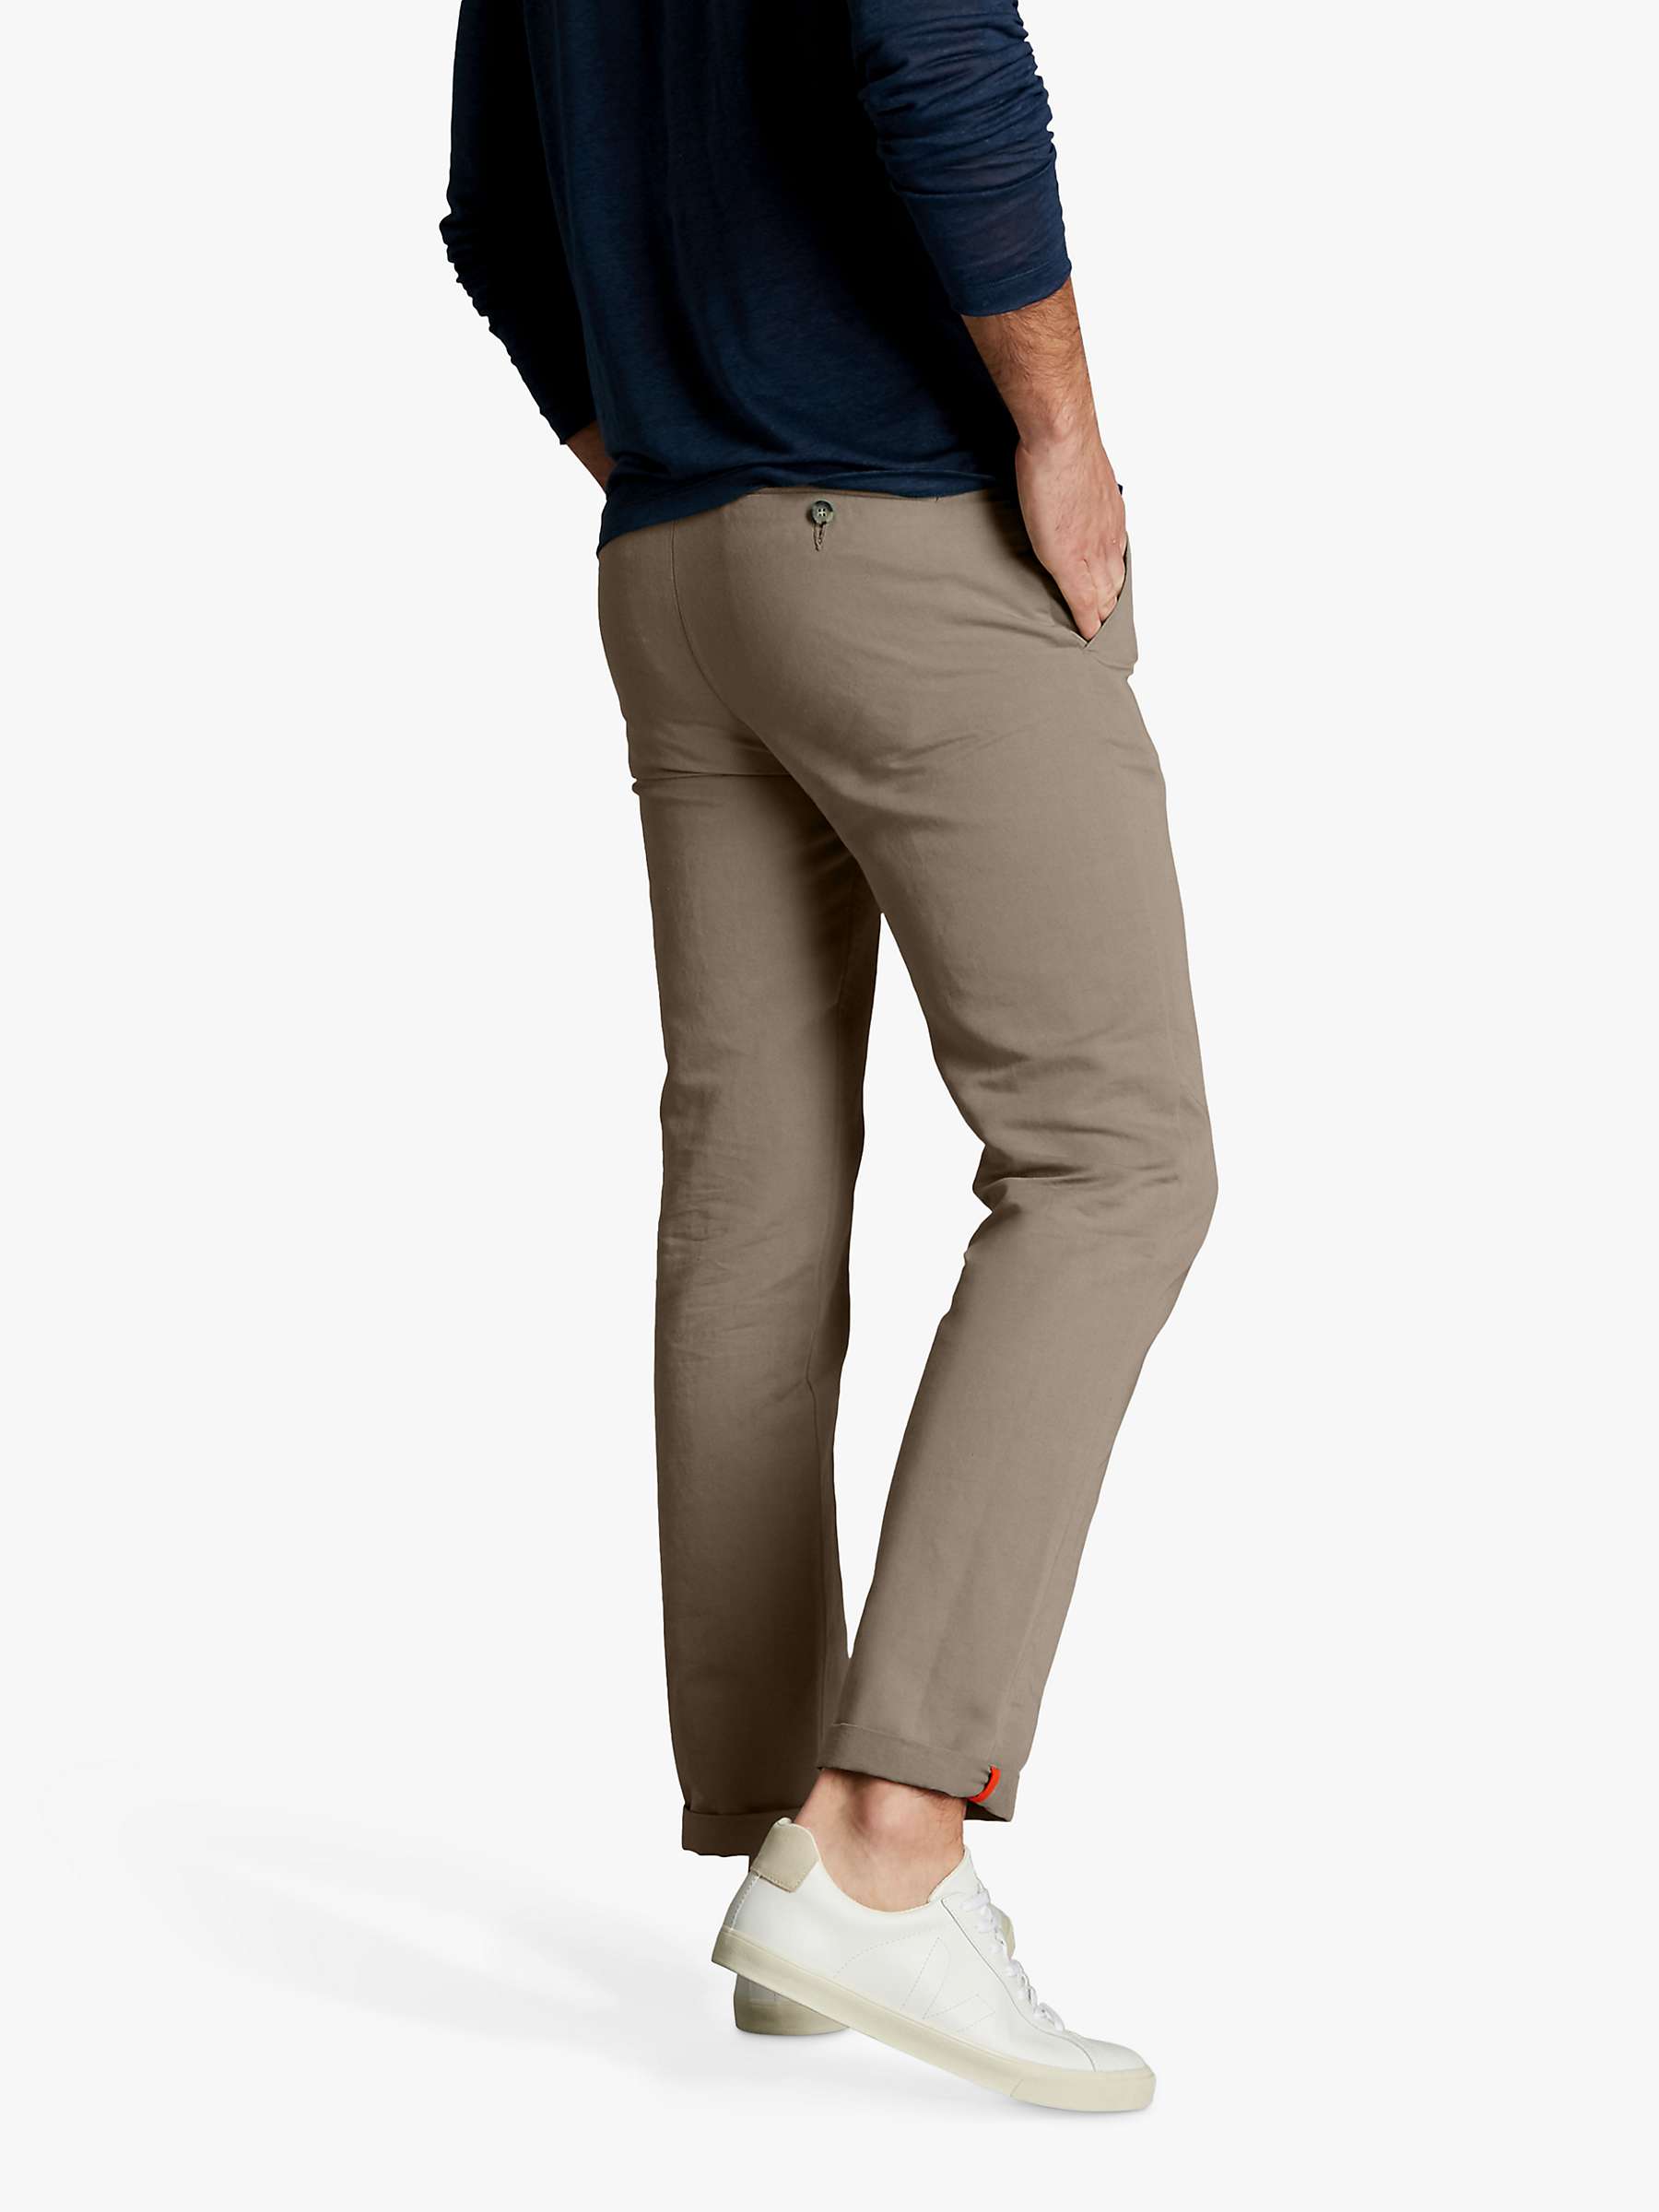 Buy SPOKE Linen Sharps Broad Thigh Trousers Online at johnlewis.com